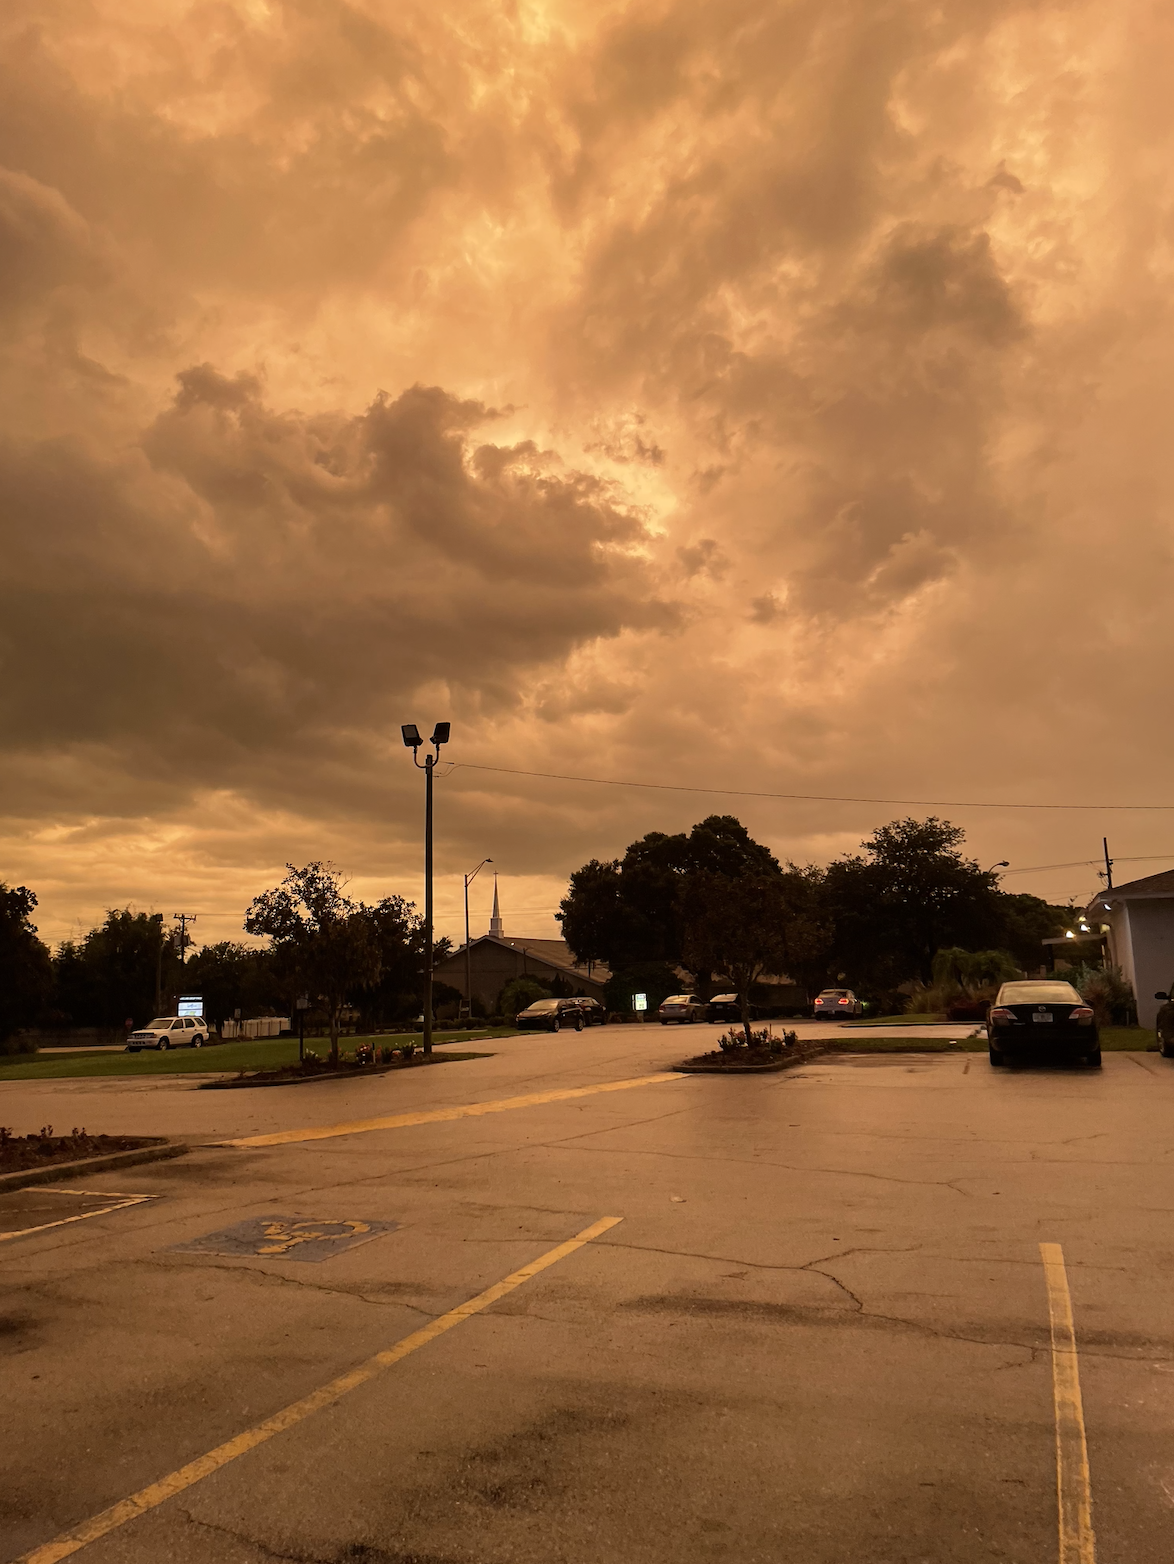 Sky with dramatic clouds over a parking lot, giving a vivid, almost fiery appearance to the scene